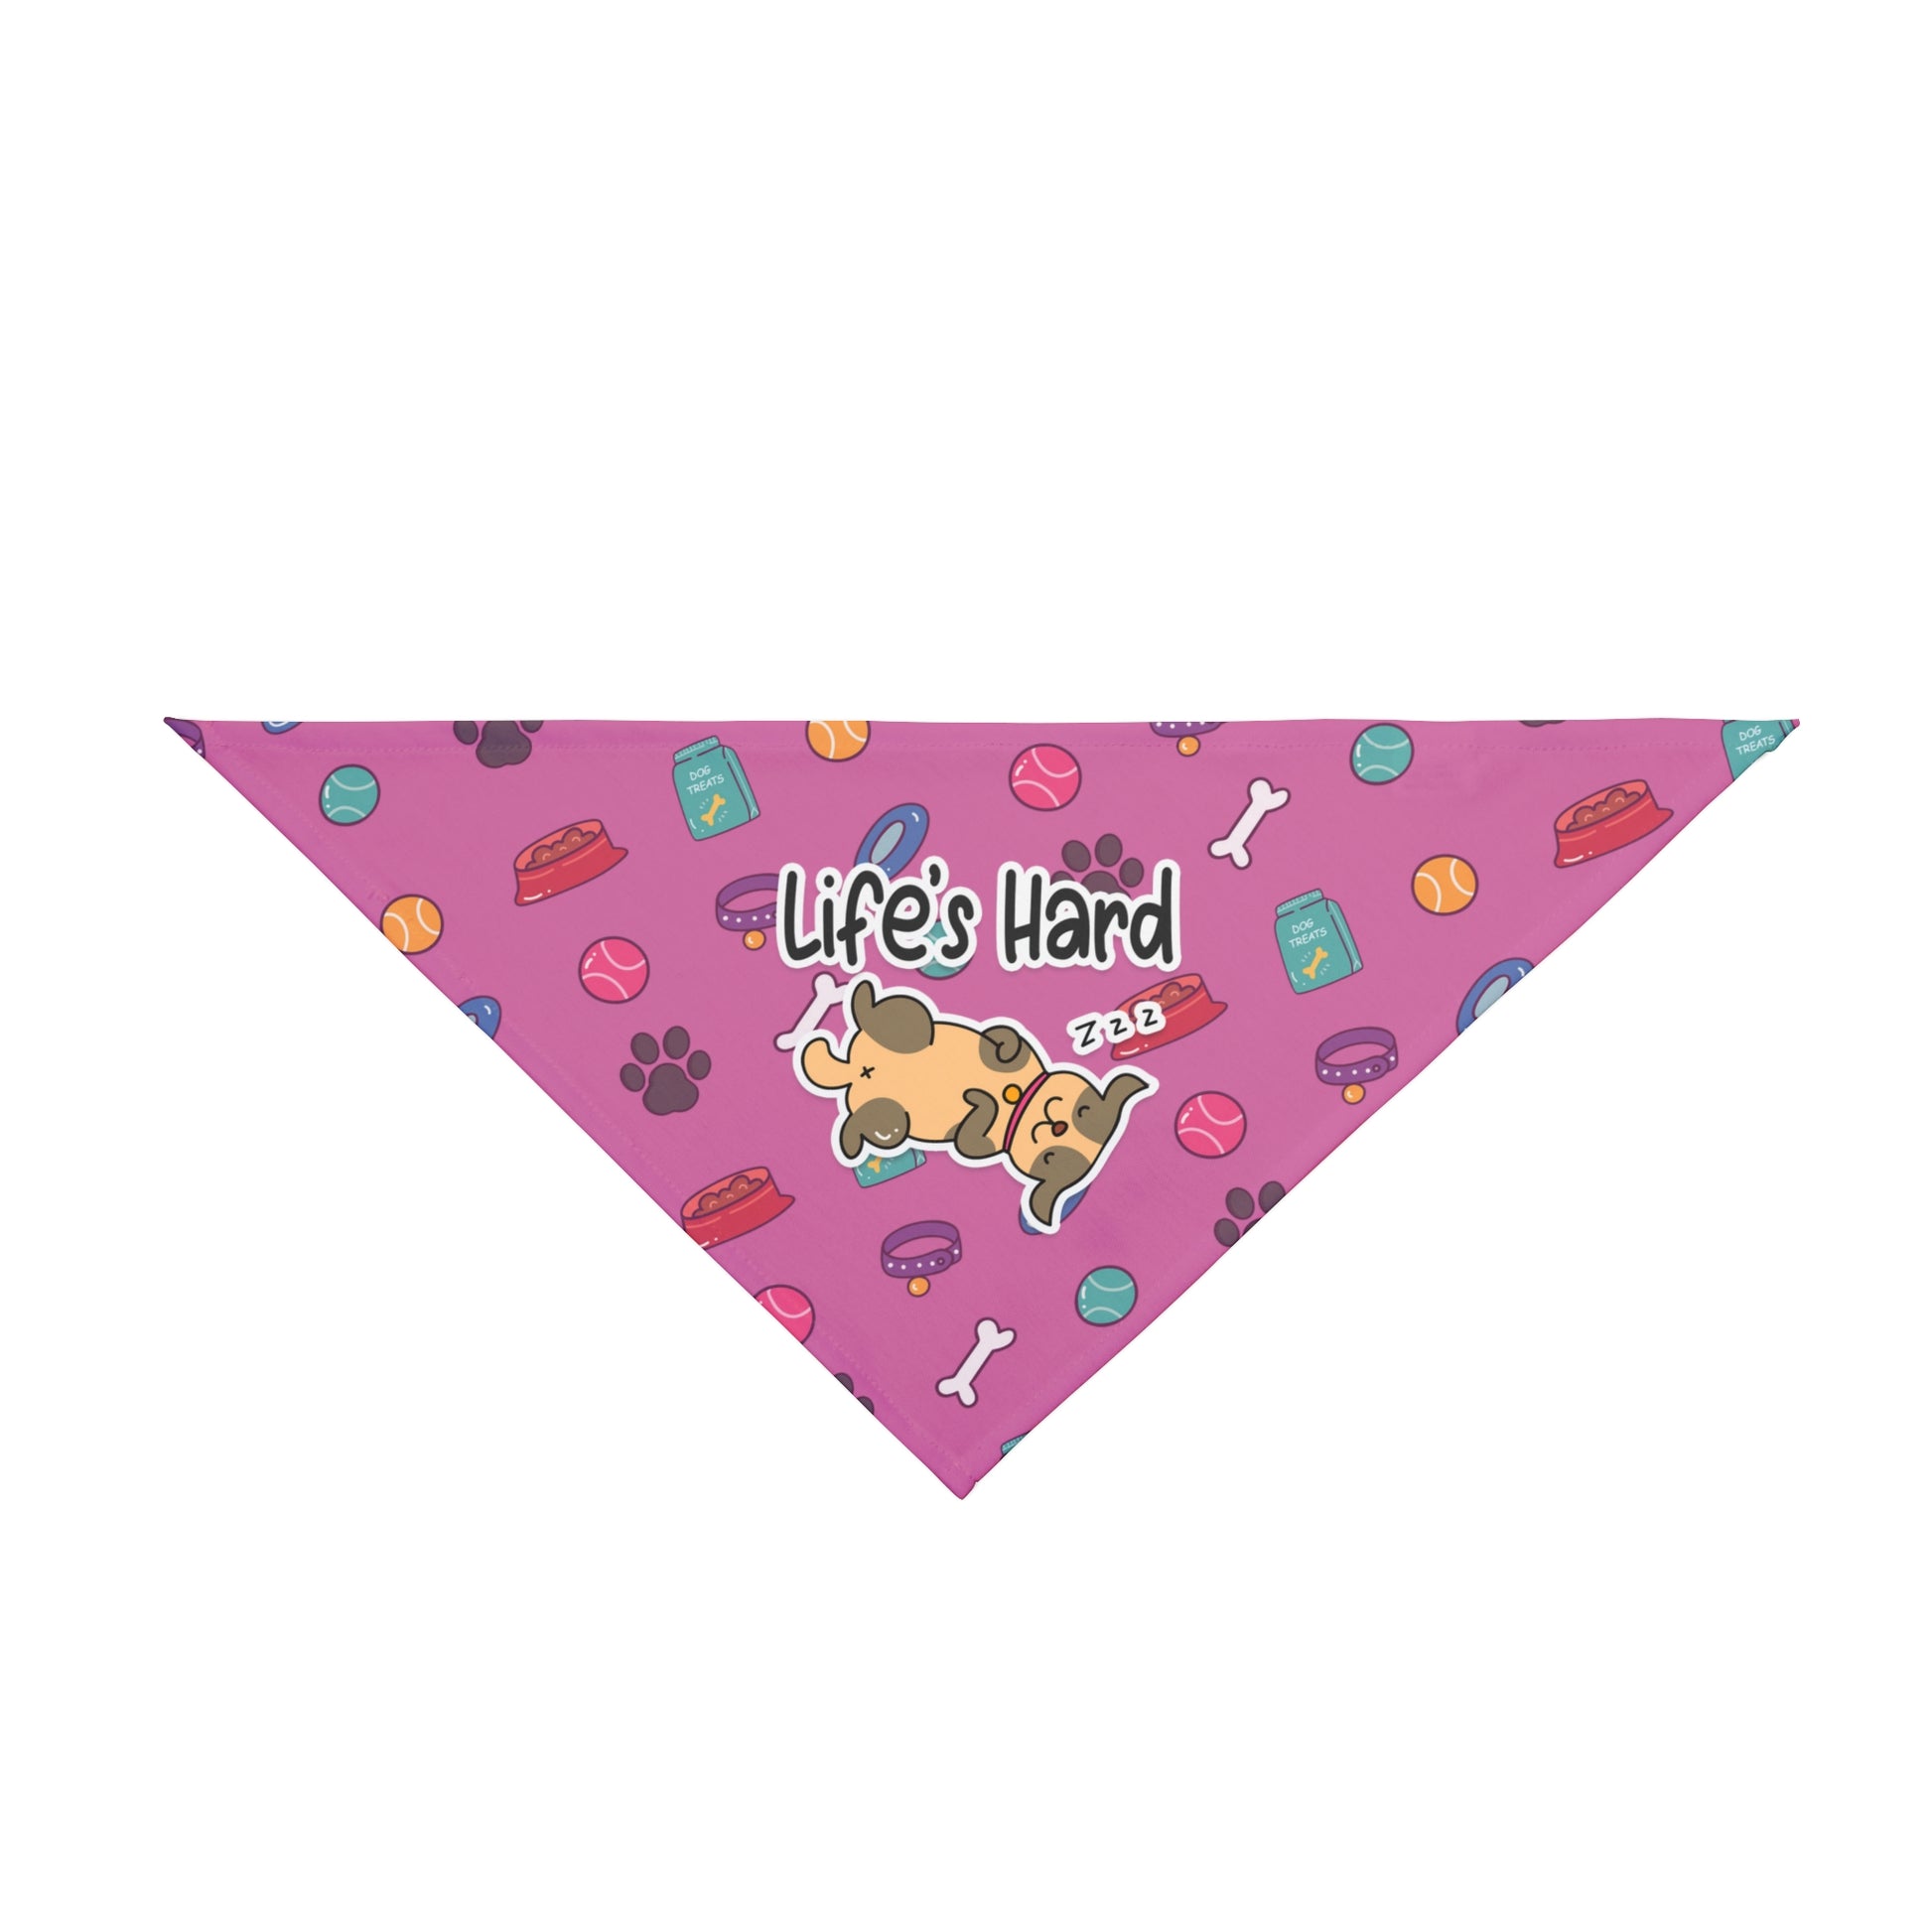 A pet bandana with a beautiful pattern design featuring all things dog love. A smiling dog sleeping below a message that says "Life's hard". Bandana's Color is pink